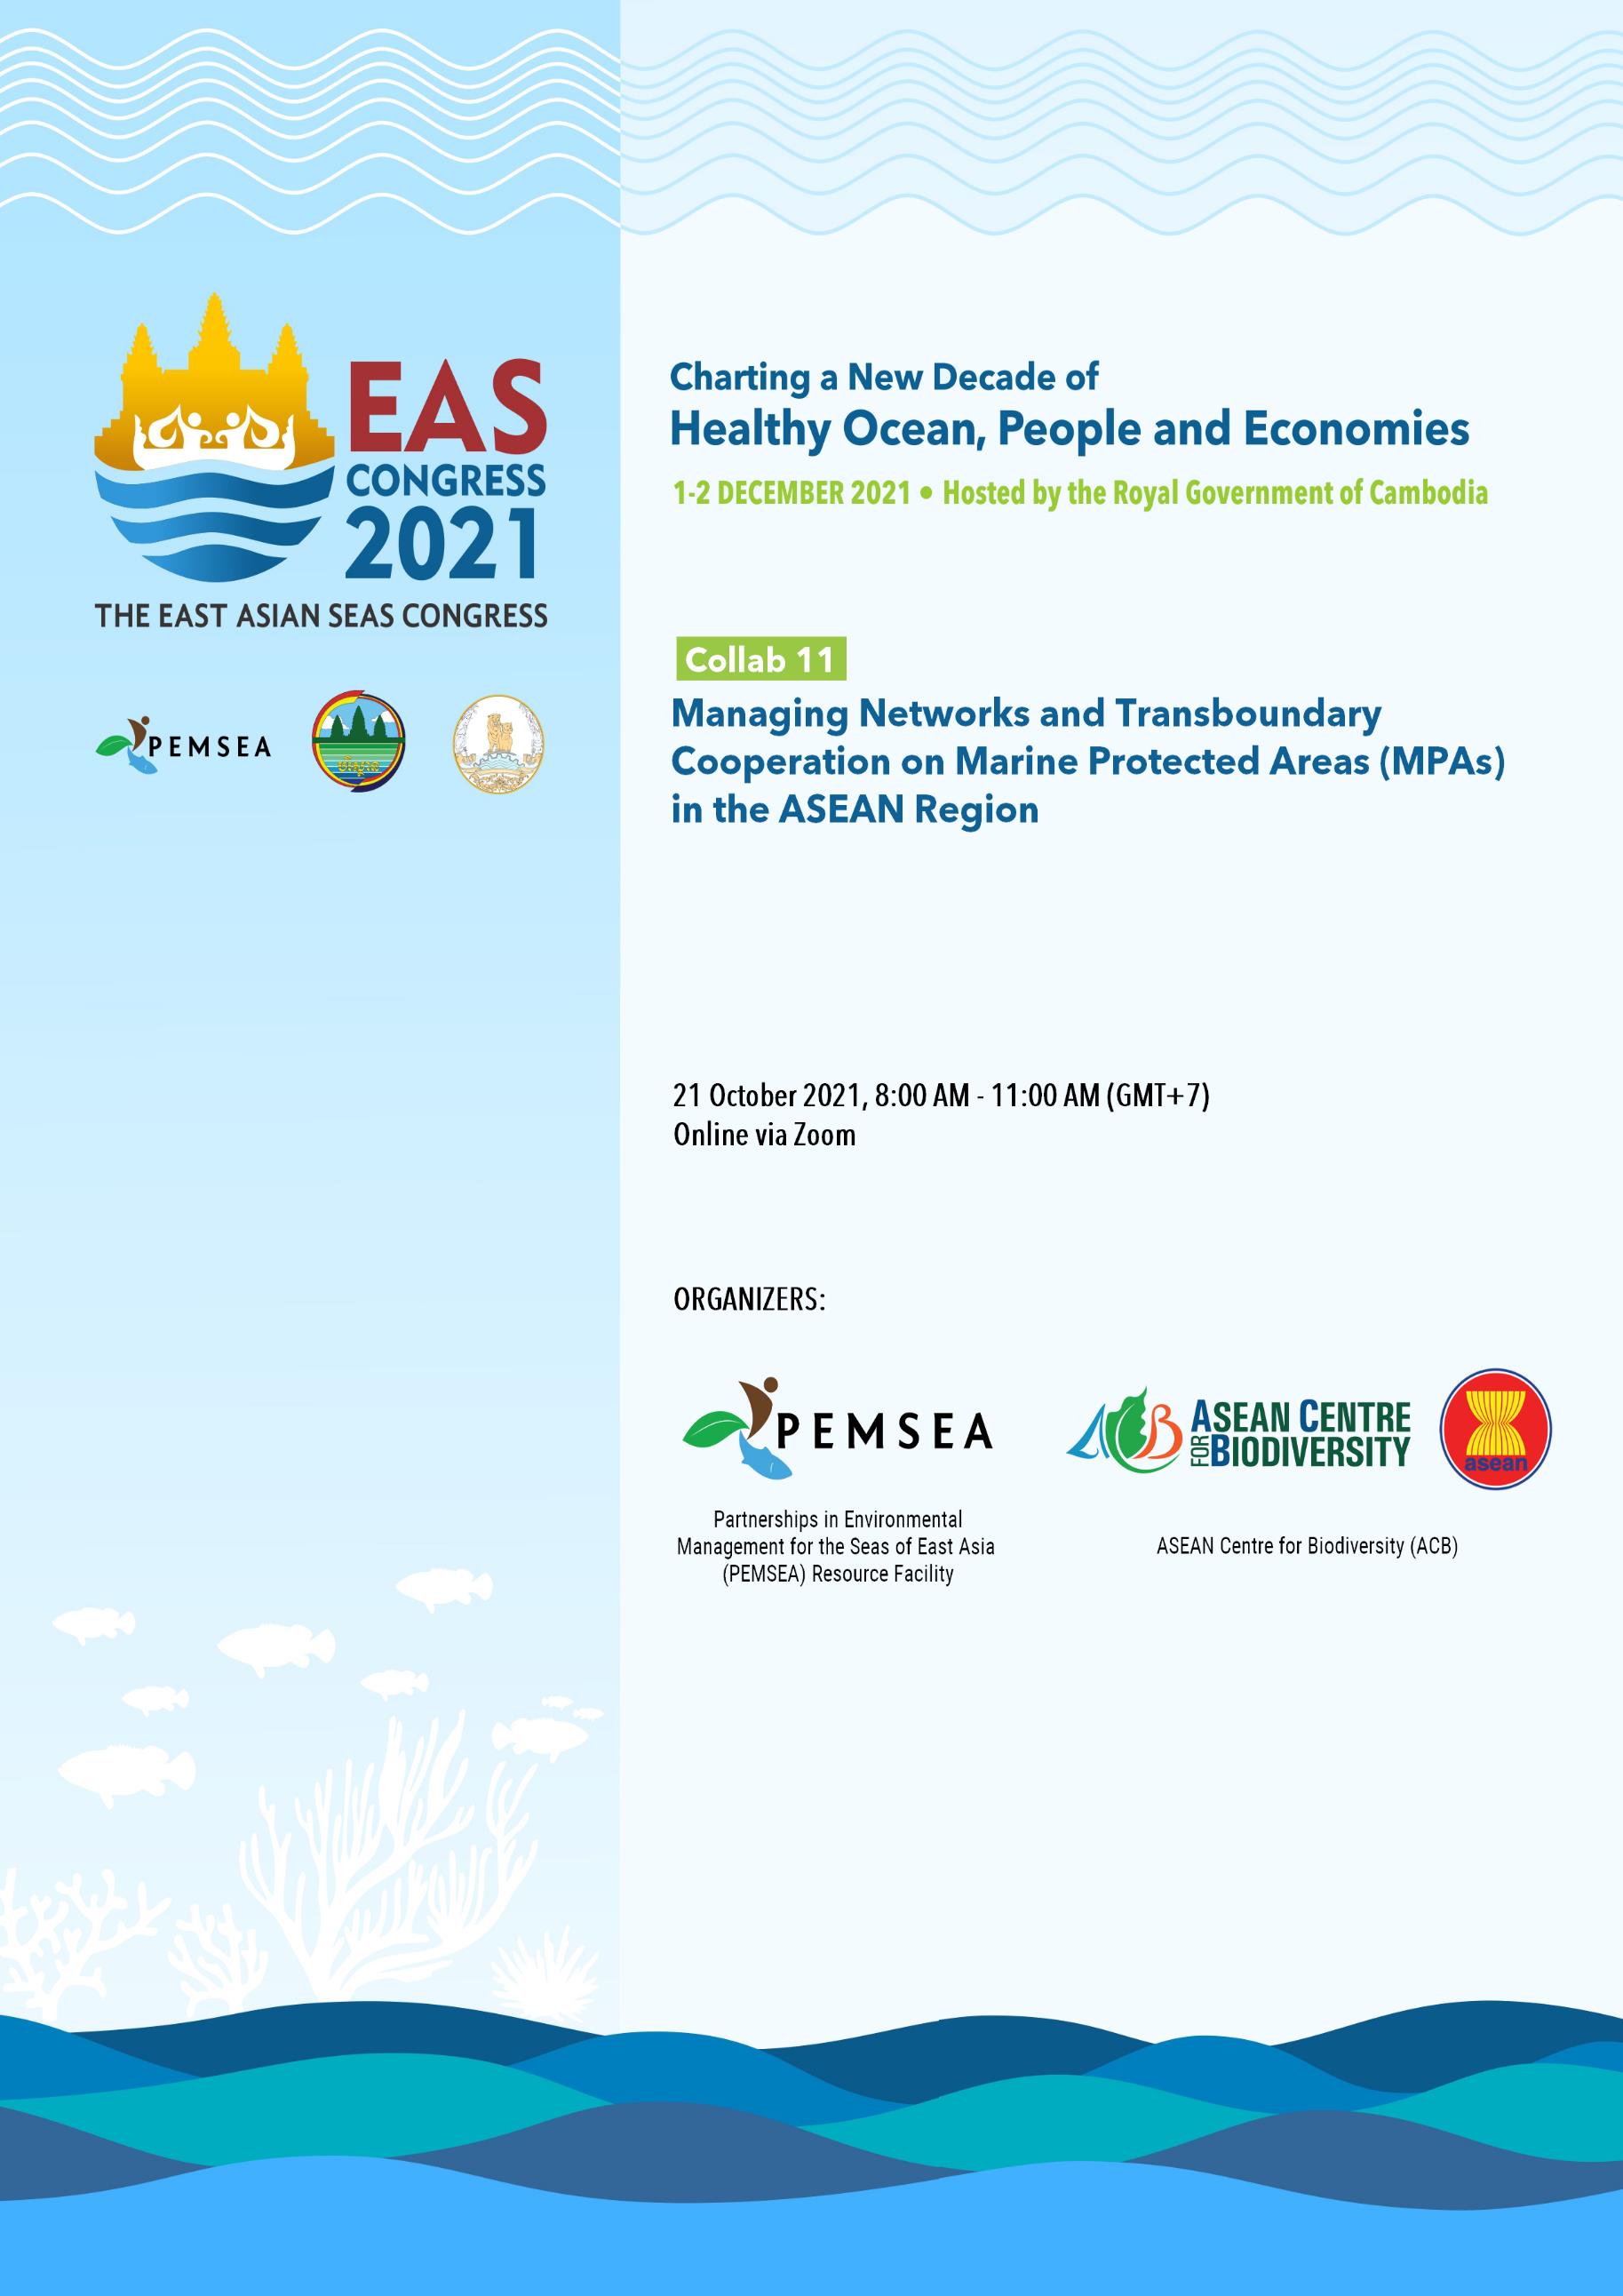 Collab 11 Managing Networks and Transboundary Cooperation on Marine Protected Areas (MPAs) in the ASEAN Region